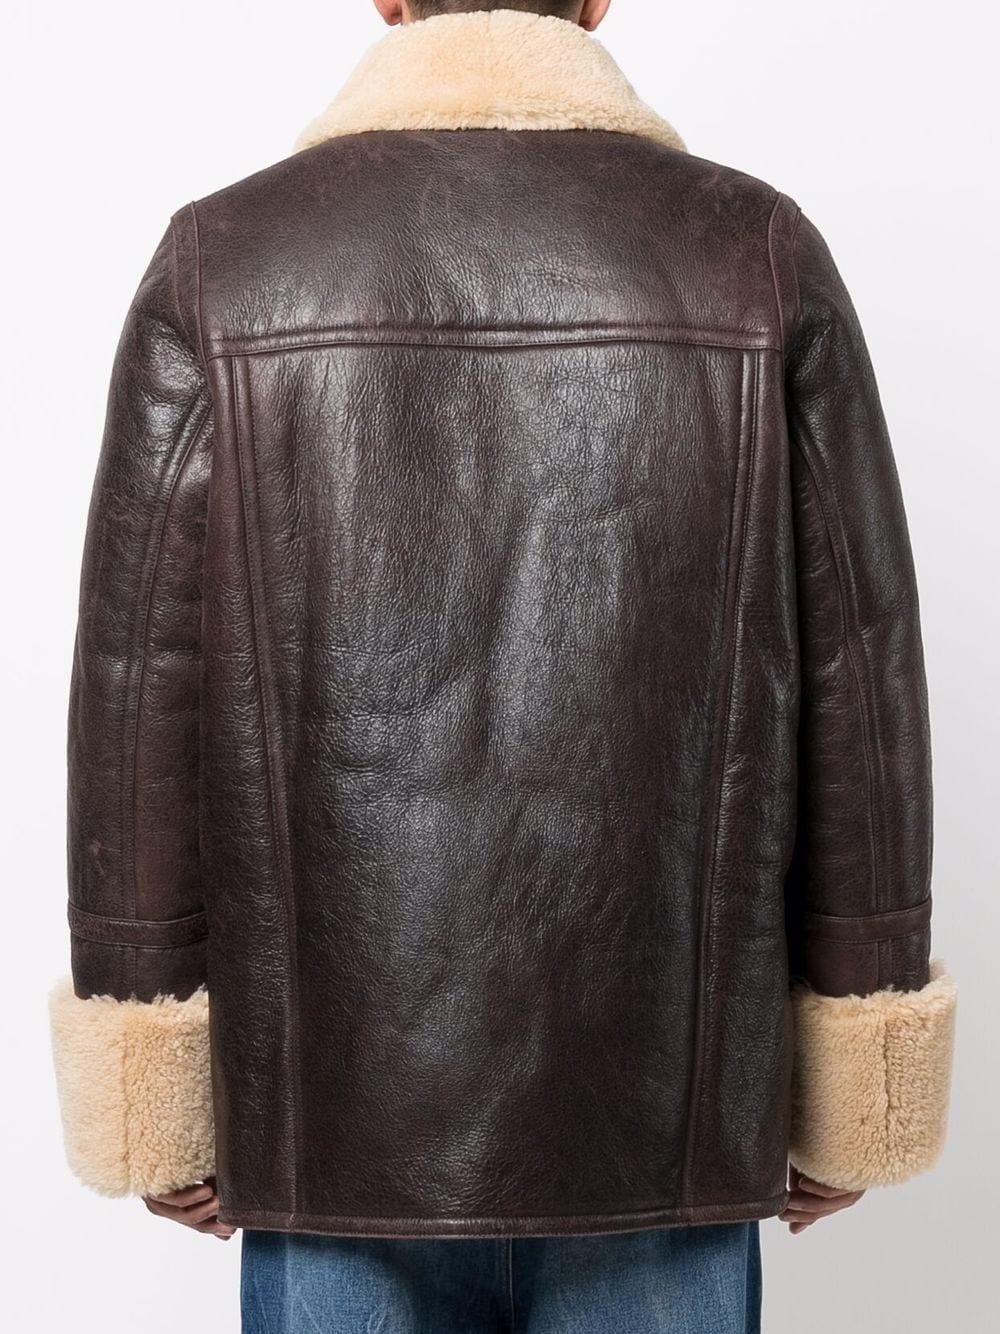 Ami Paris Shearling-trimmed Leather Jacket in Black | Lyst